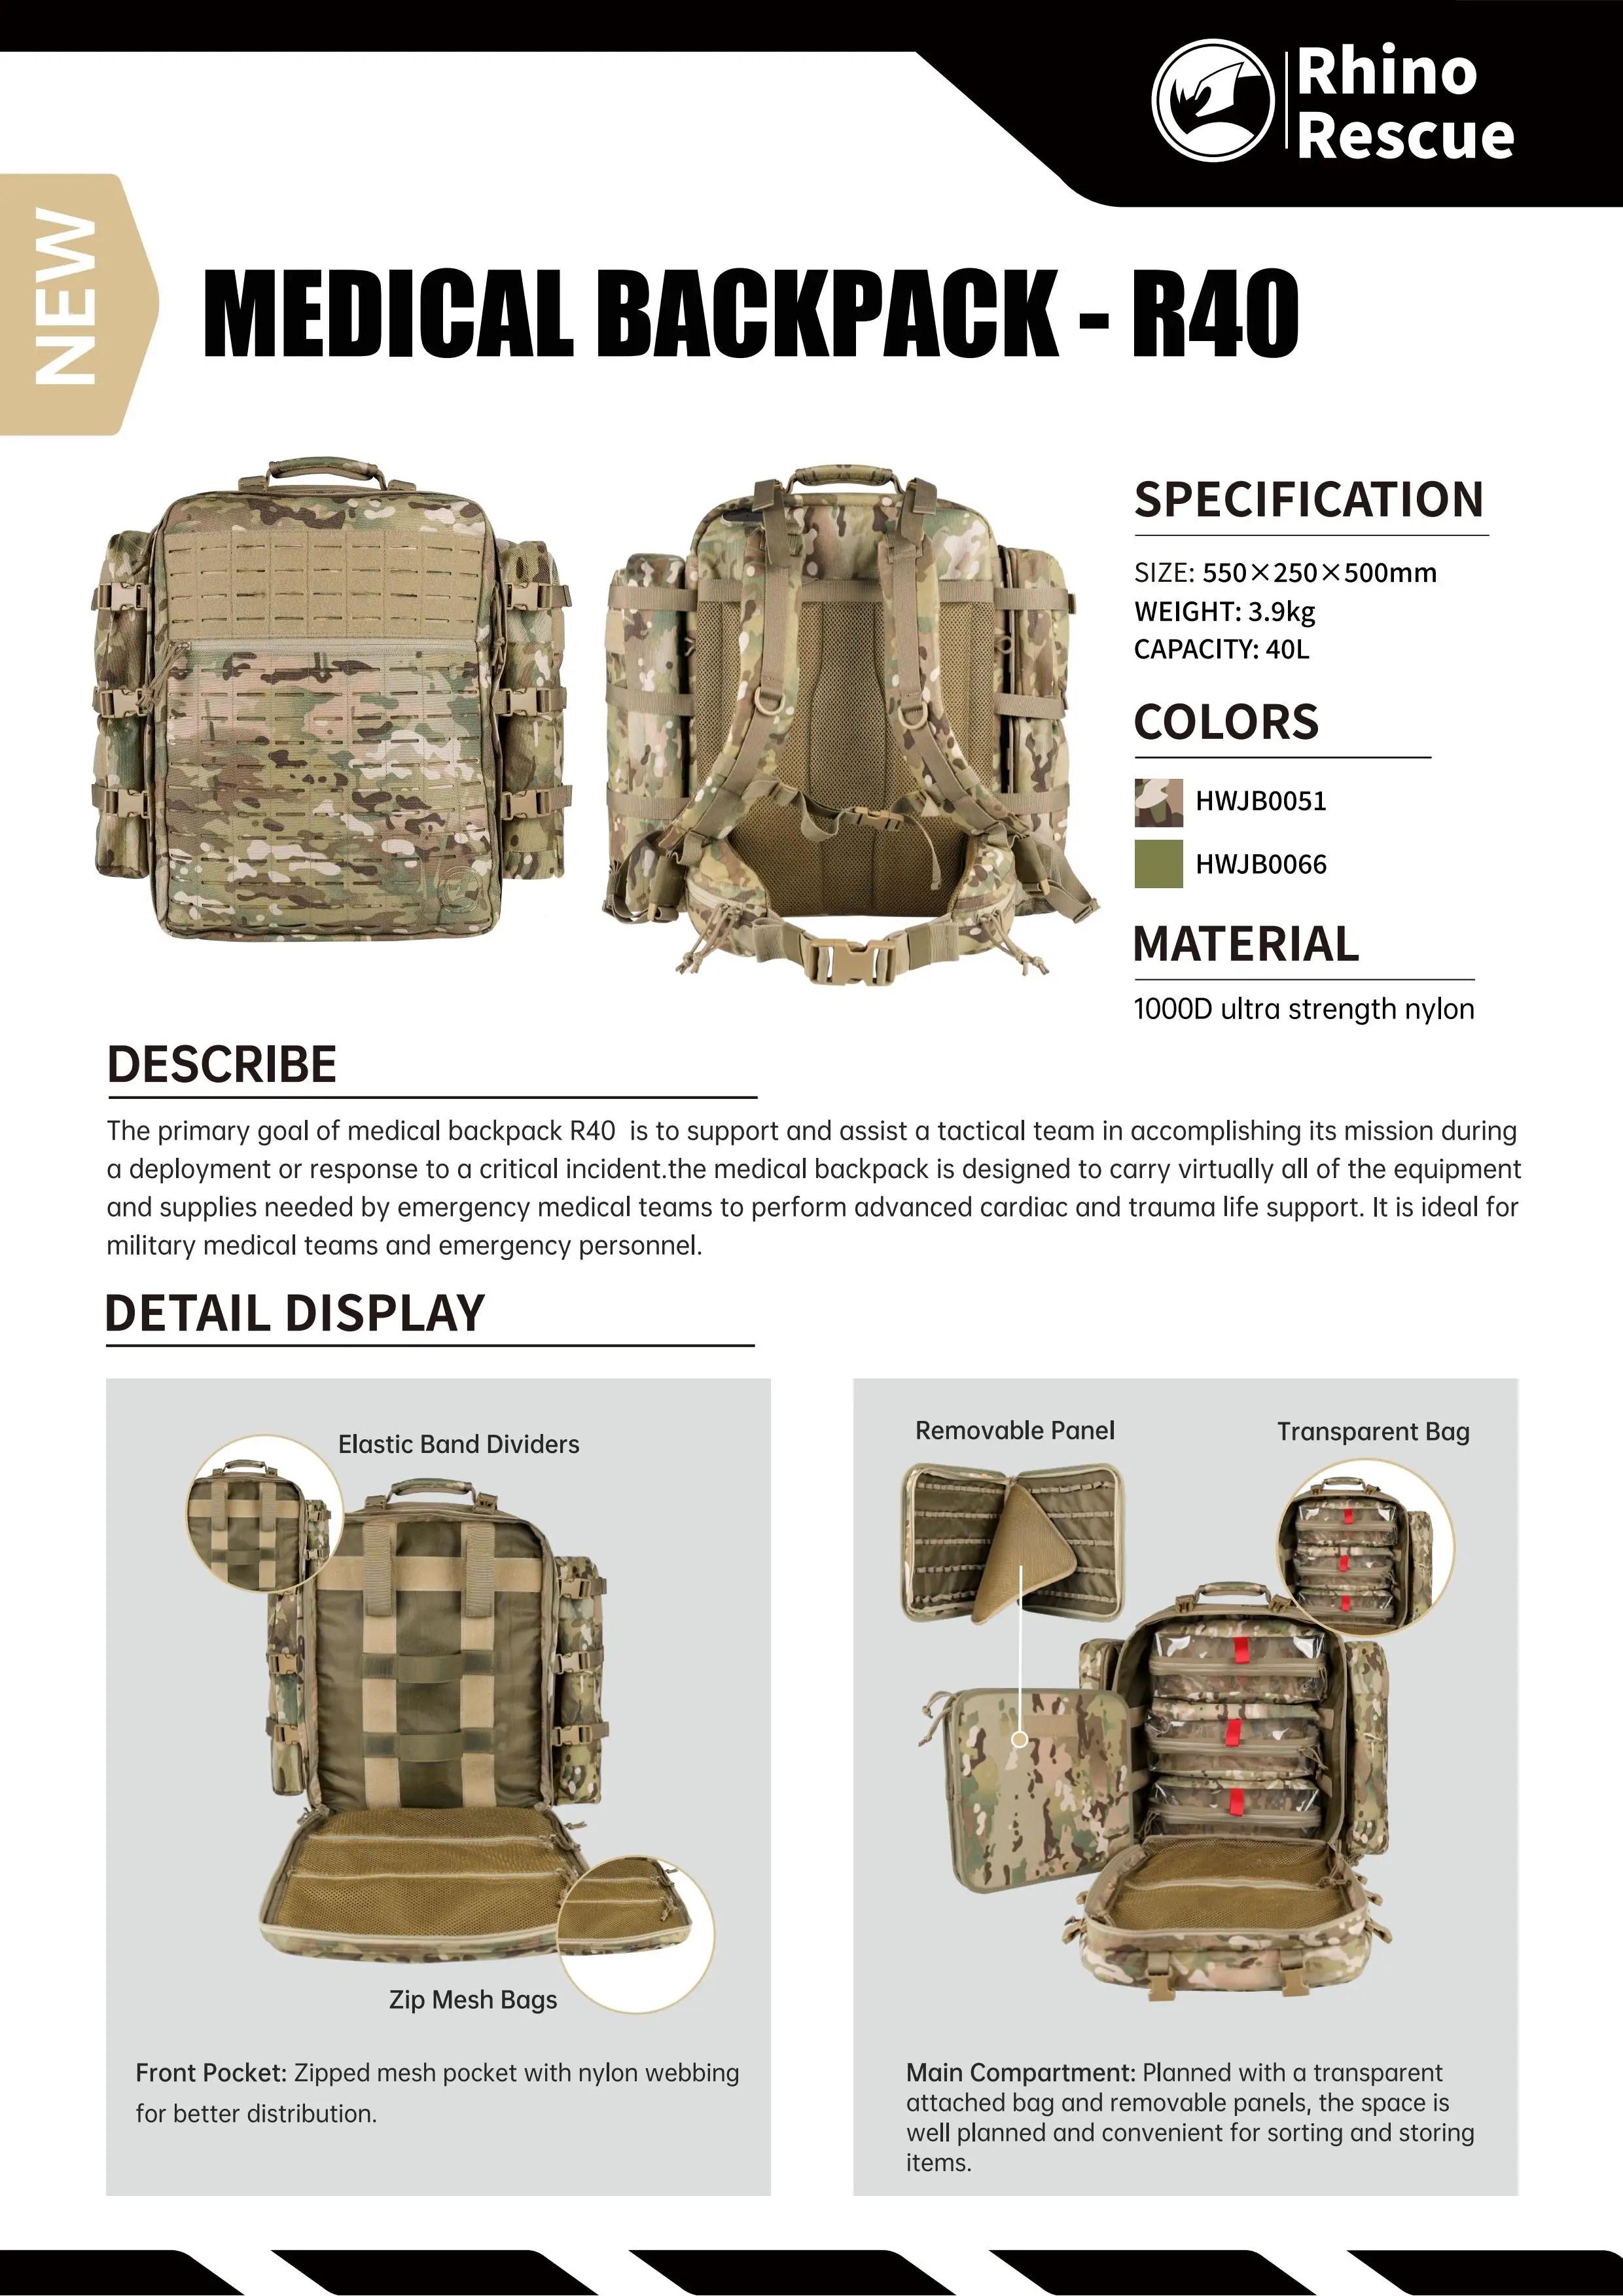 Product Rhino Rescue 40L Medical Tactical Backpack, Medical Supplies Bag First Aid for Hiking, Trekking Hunting,Camping - EMSRUN image